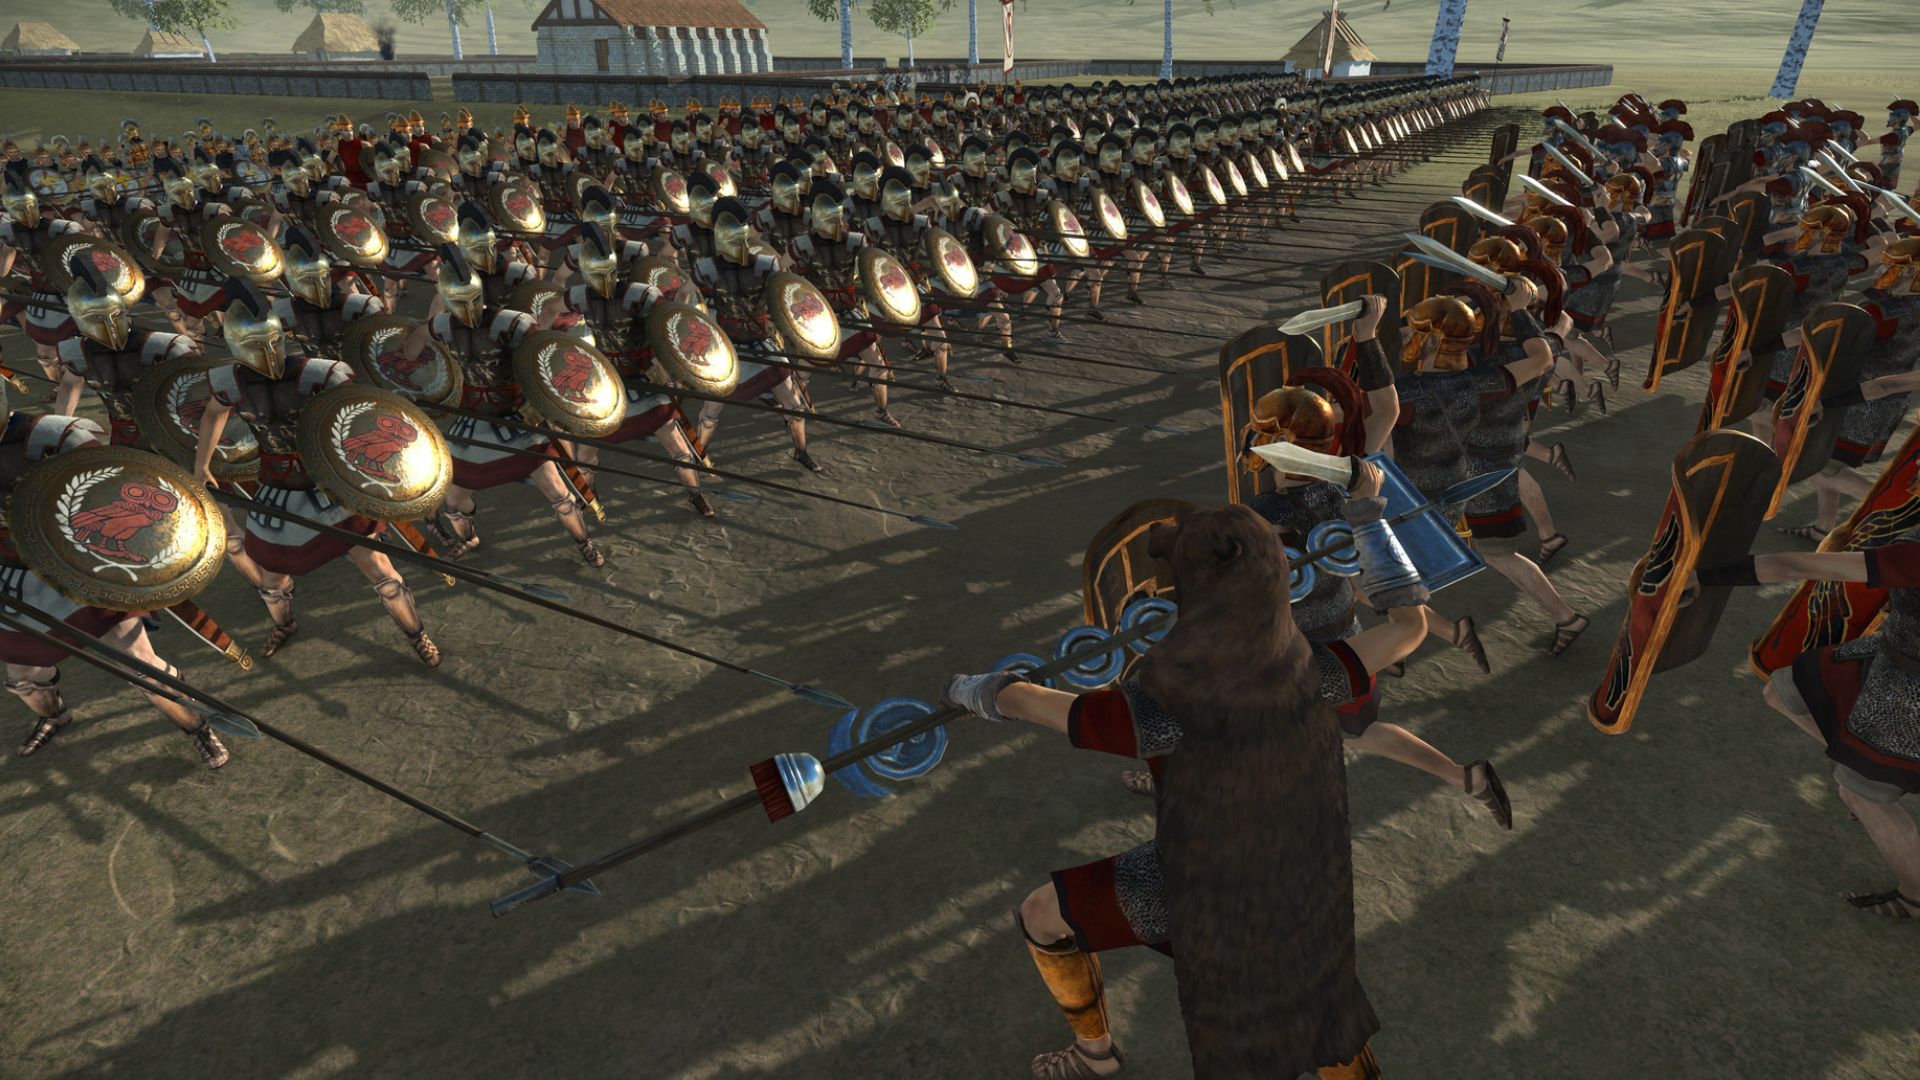 Best history games: Rome: Total War. Image shows Roman soldiers about to do batttle.